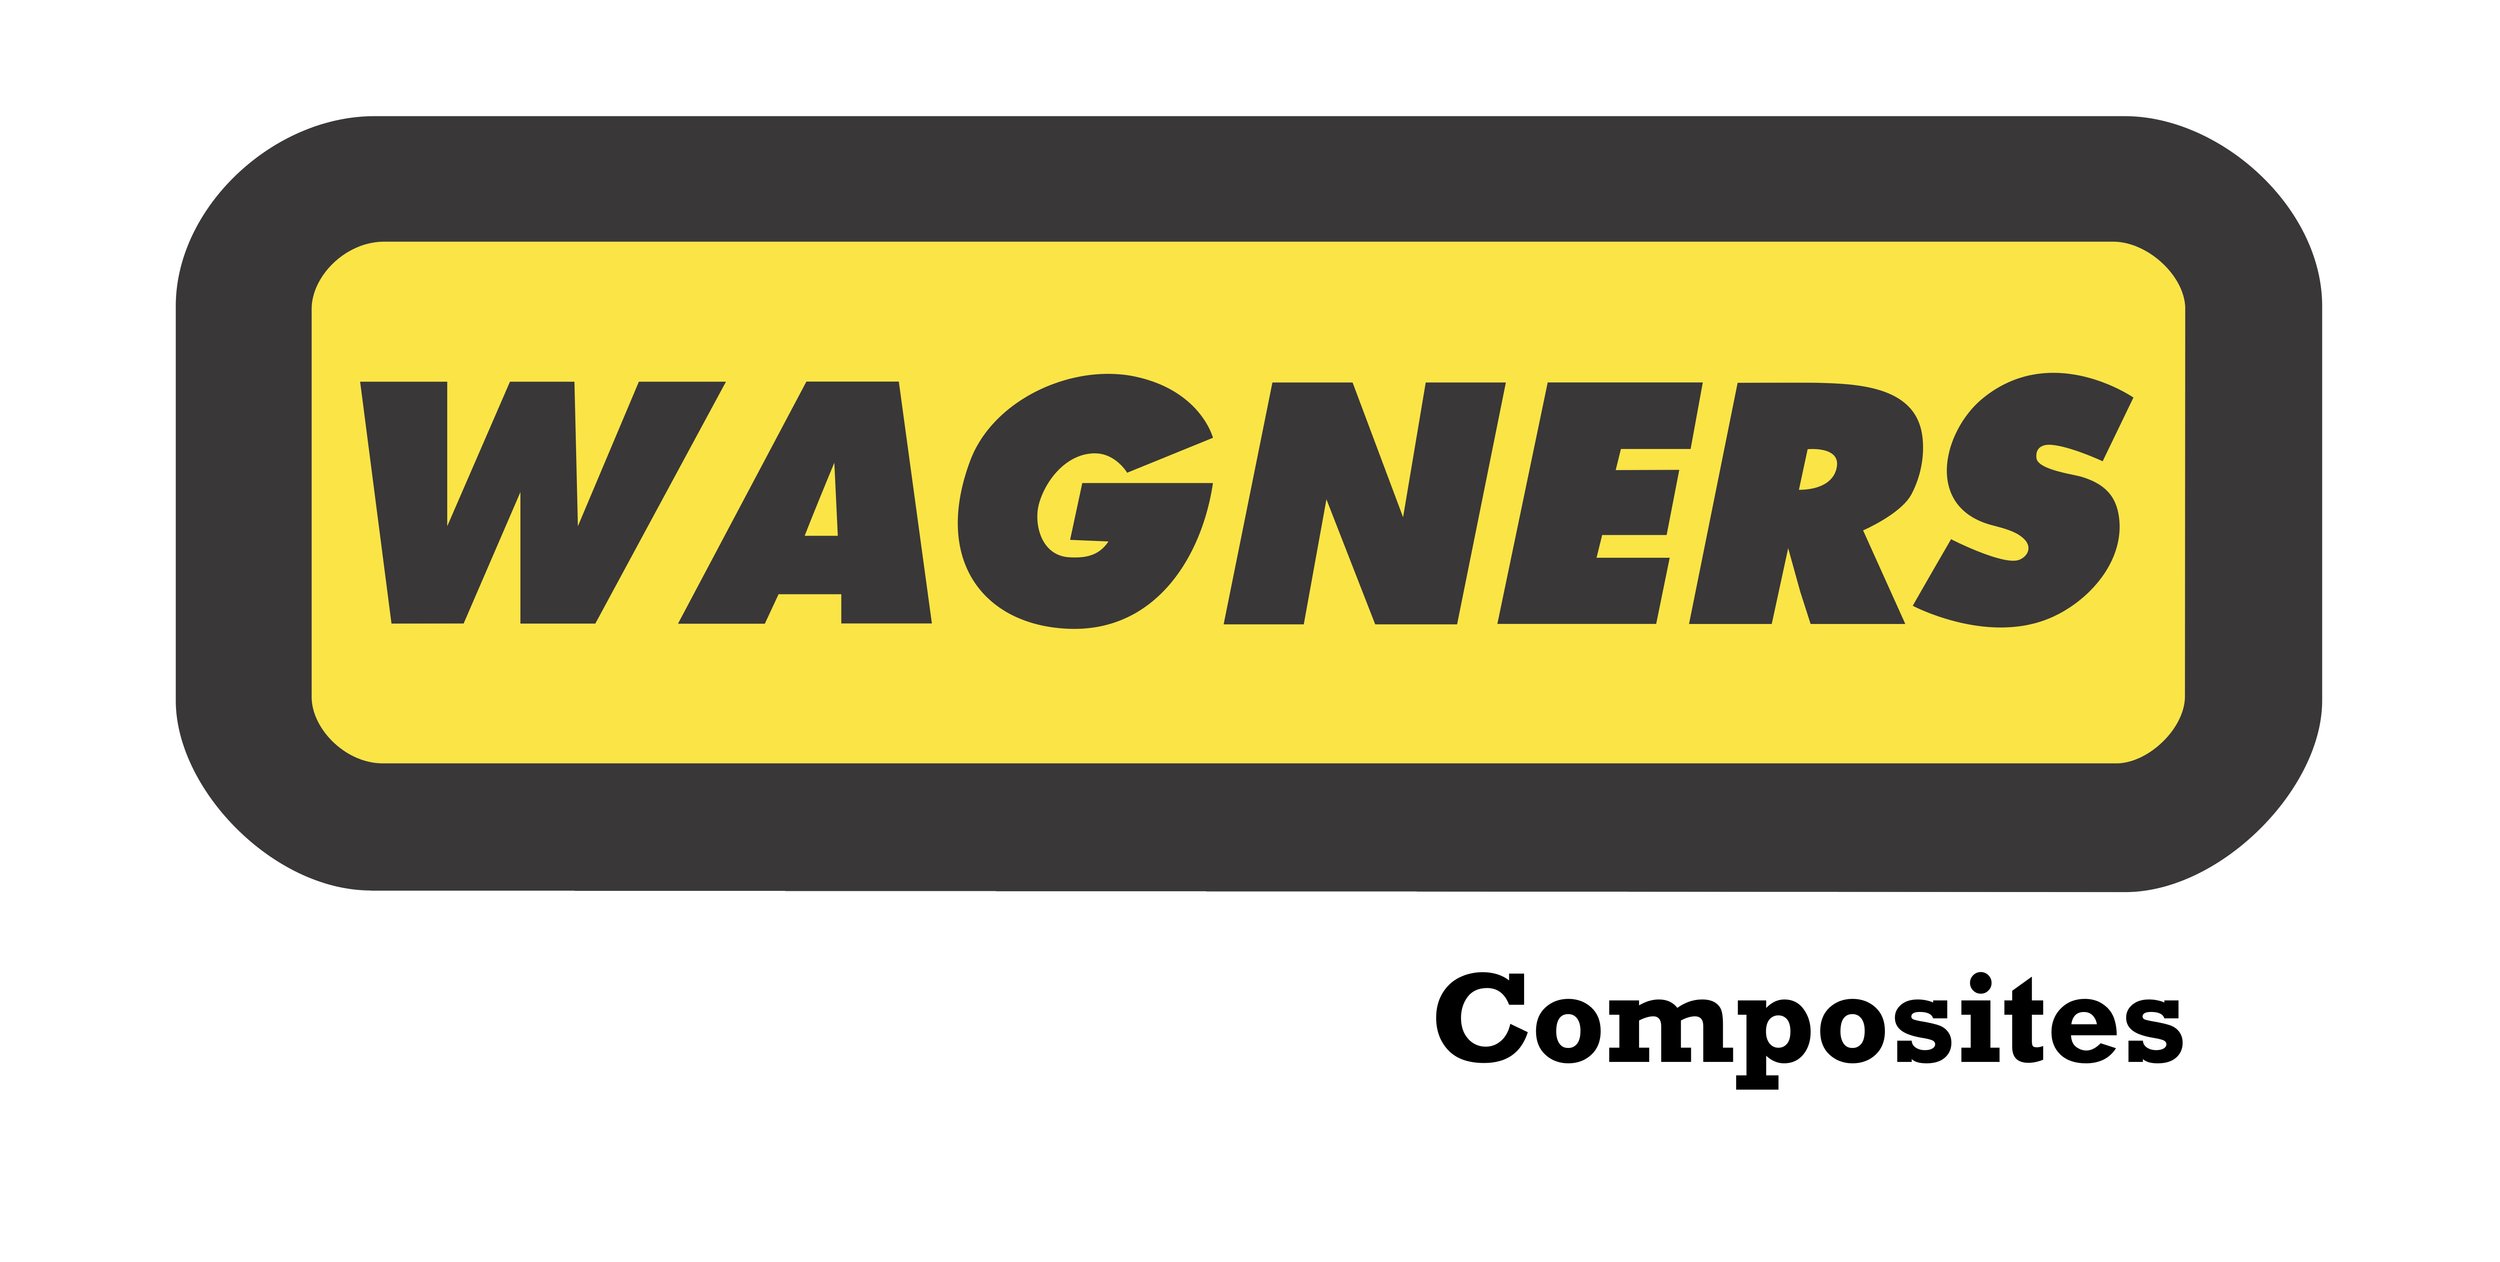 Wagners Composite (Rockwell).jpg